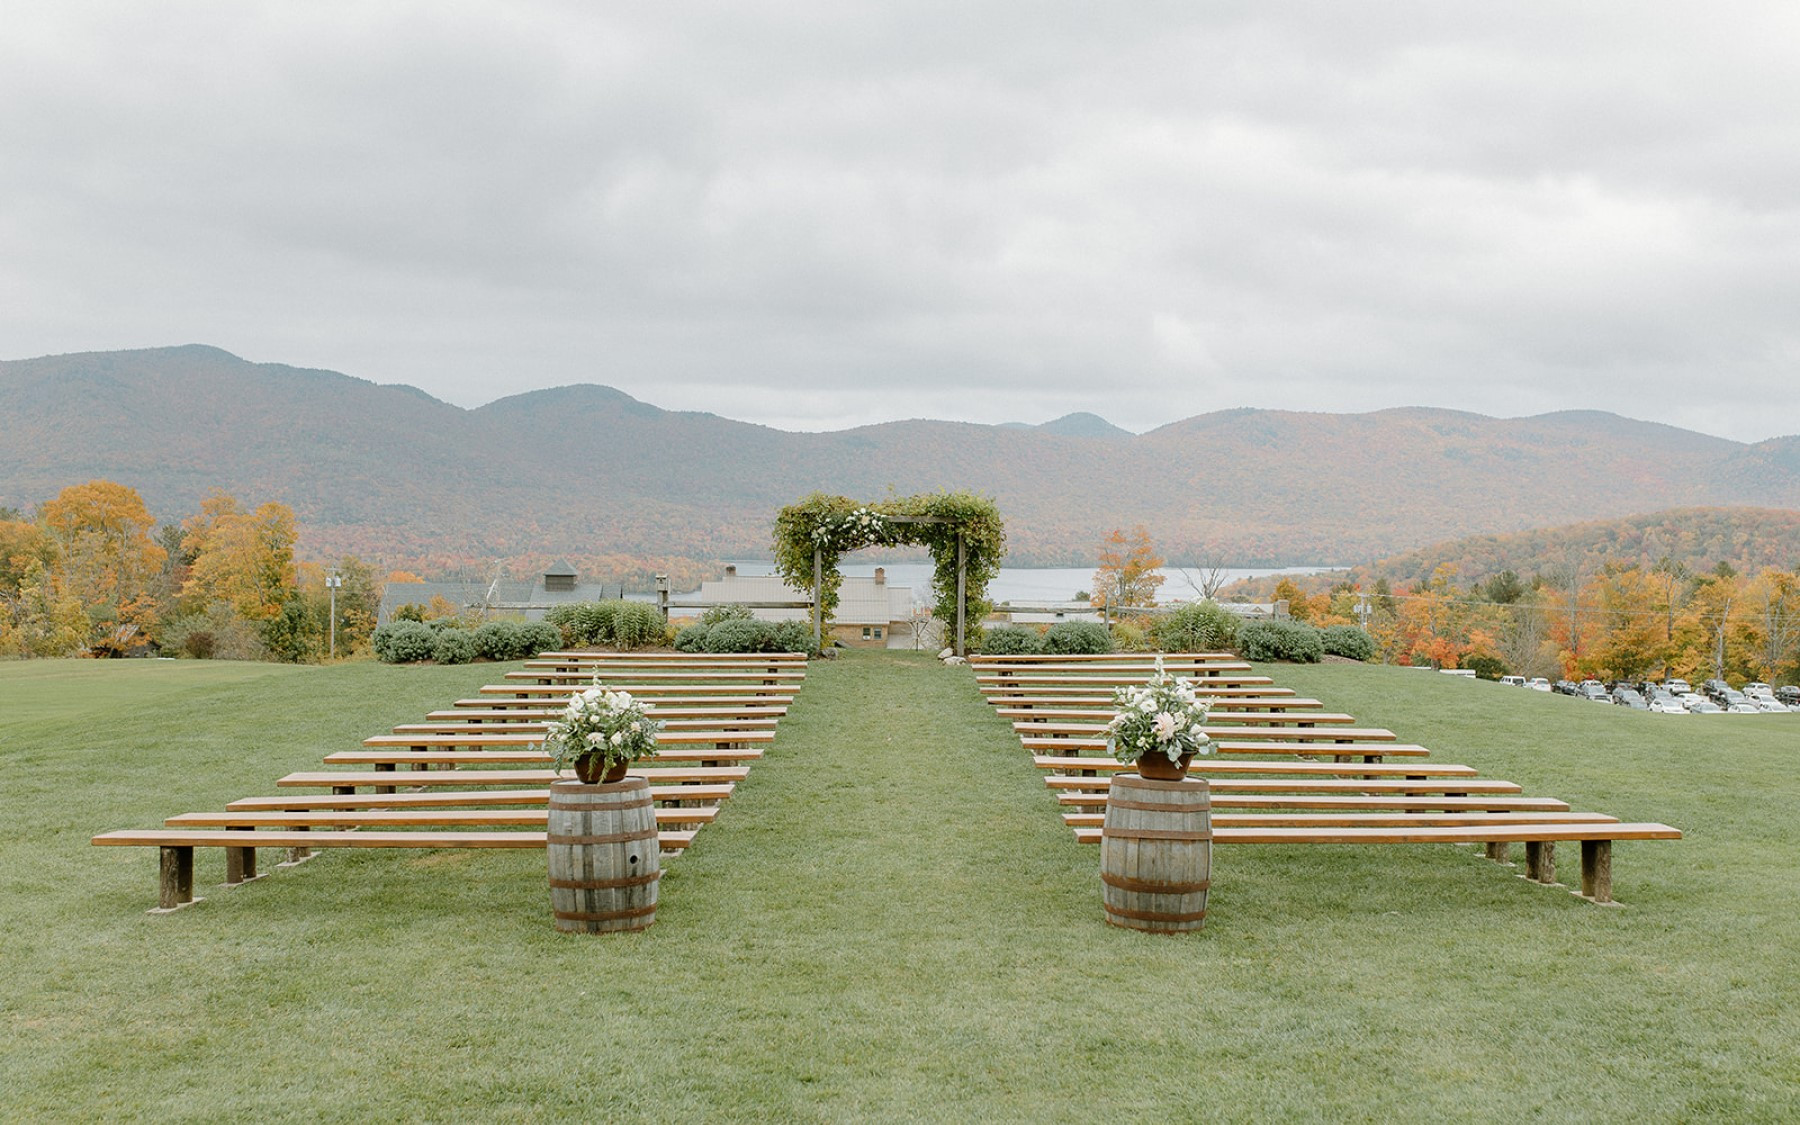 wedding knoll in fall with floral bouquets on top of whiskey barrels in front of farmhouse benches. background features lake and mountains with foliage.